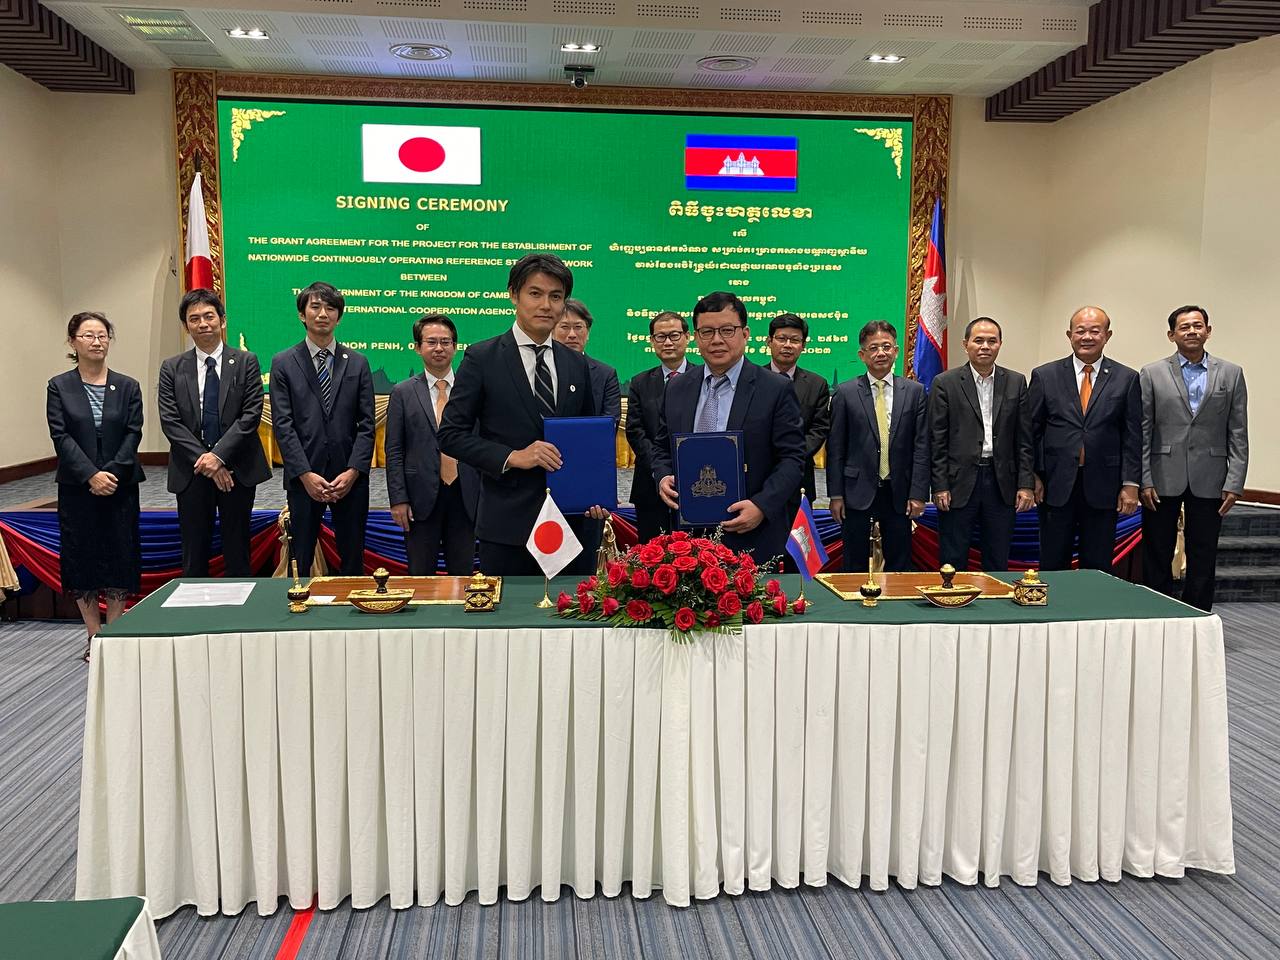 Signing ceremony (photo: Ministry of Economy and Finance)